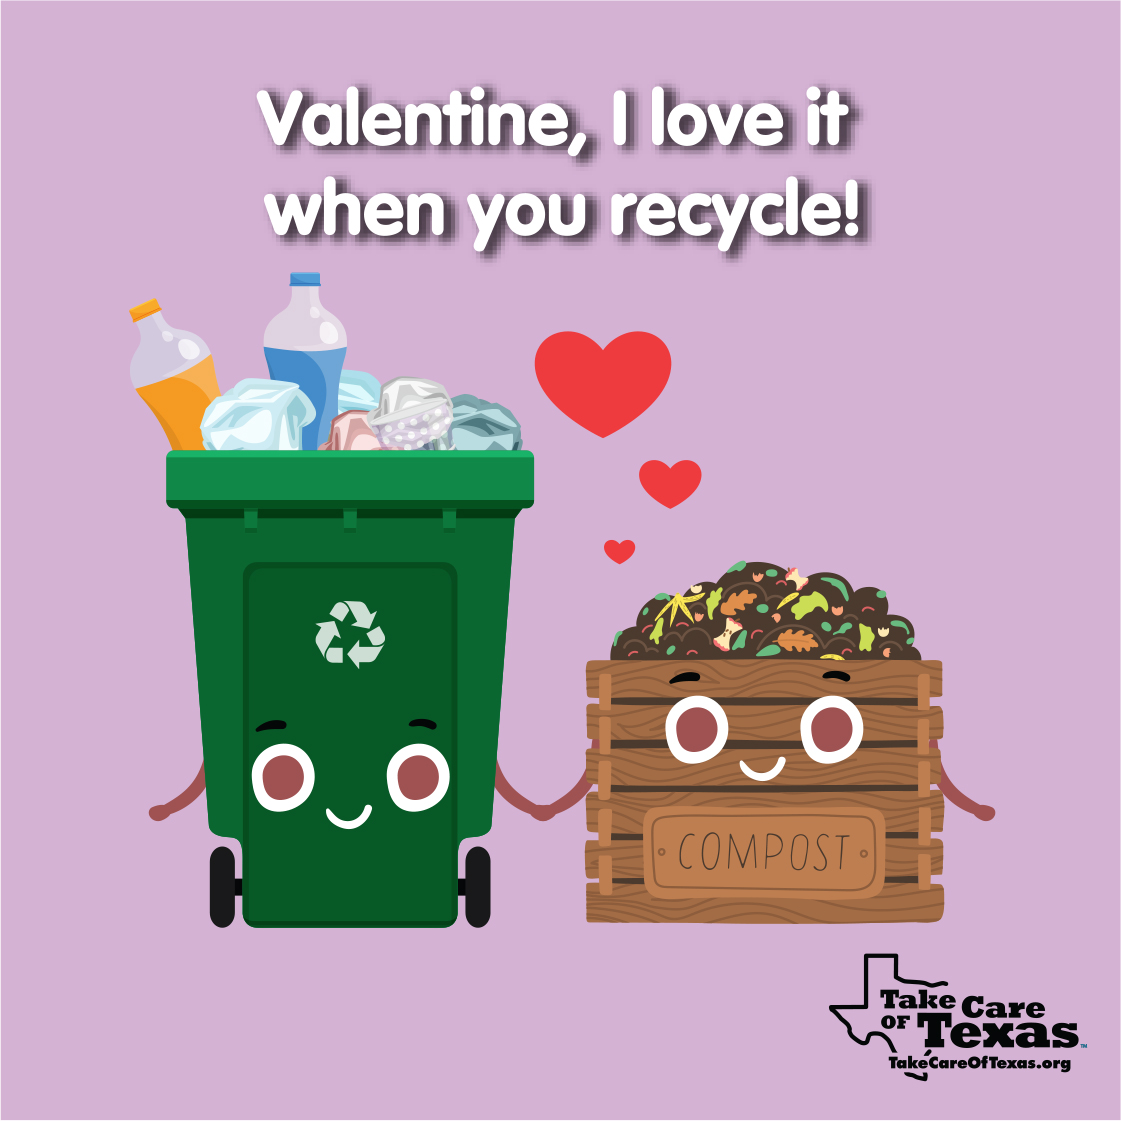 Compost and recycling bins with the text "Valentine, I love it when you recycle!"